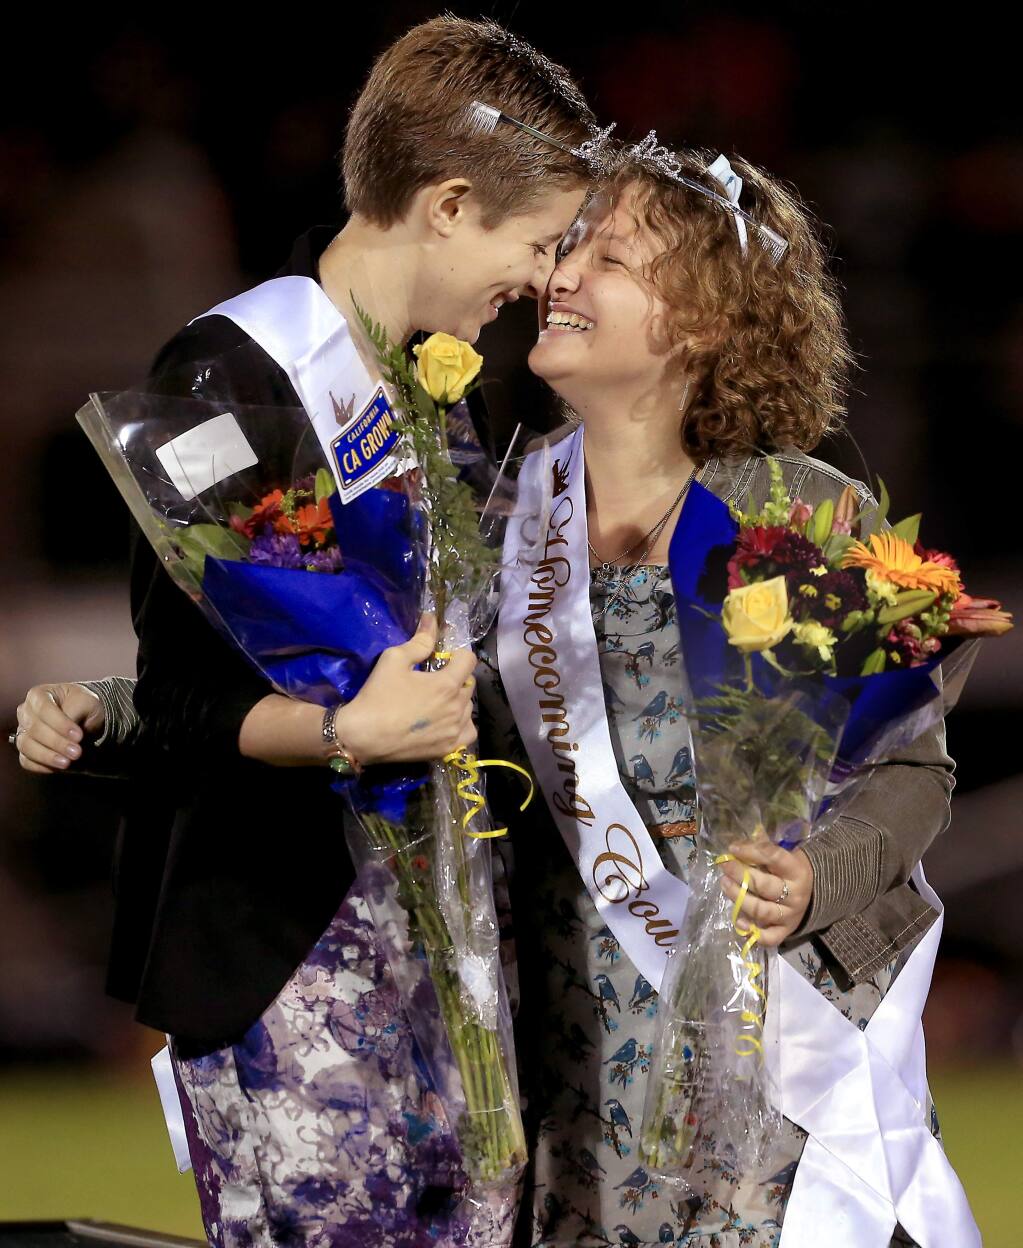 Homecoming history at Ohio State: Two women crowned royalty